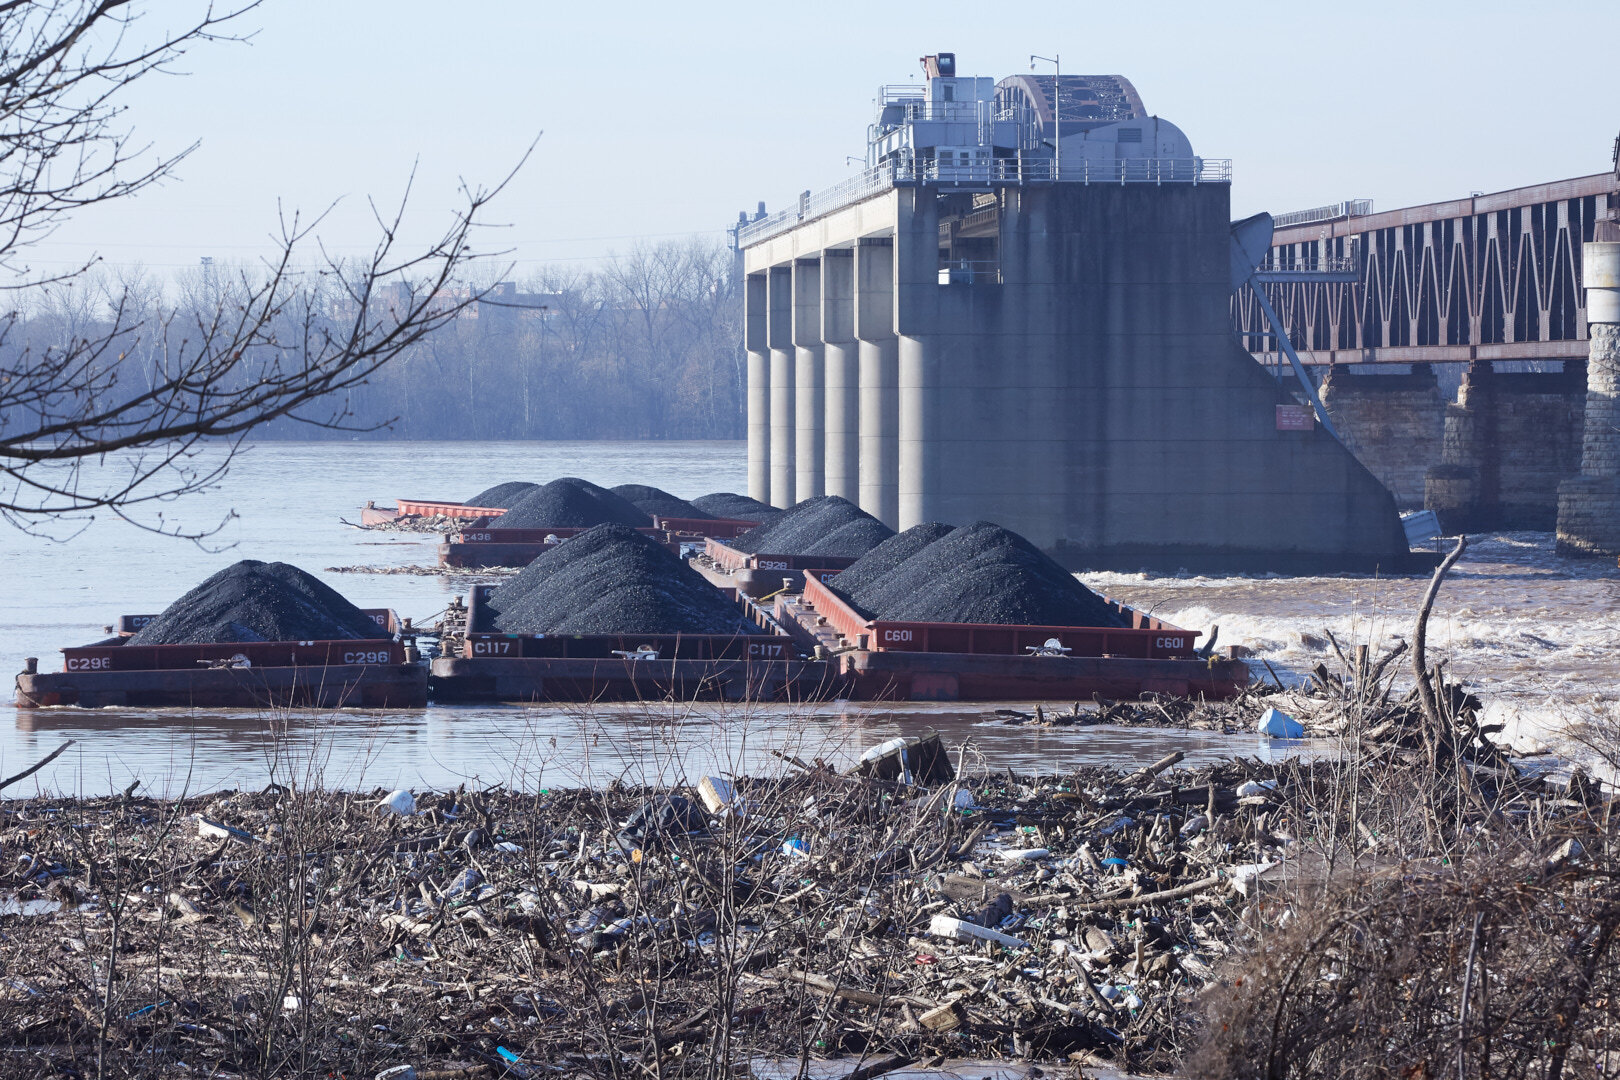 Coal barges that broke away from their tow, Ohio River dam at Louisville